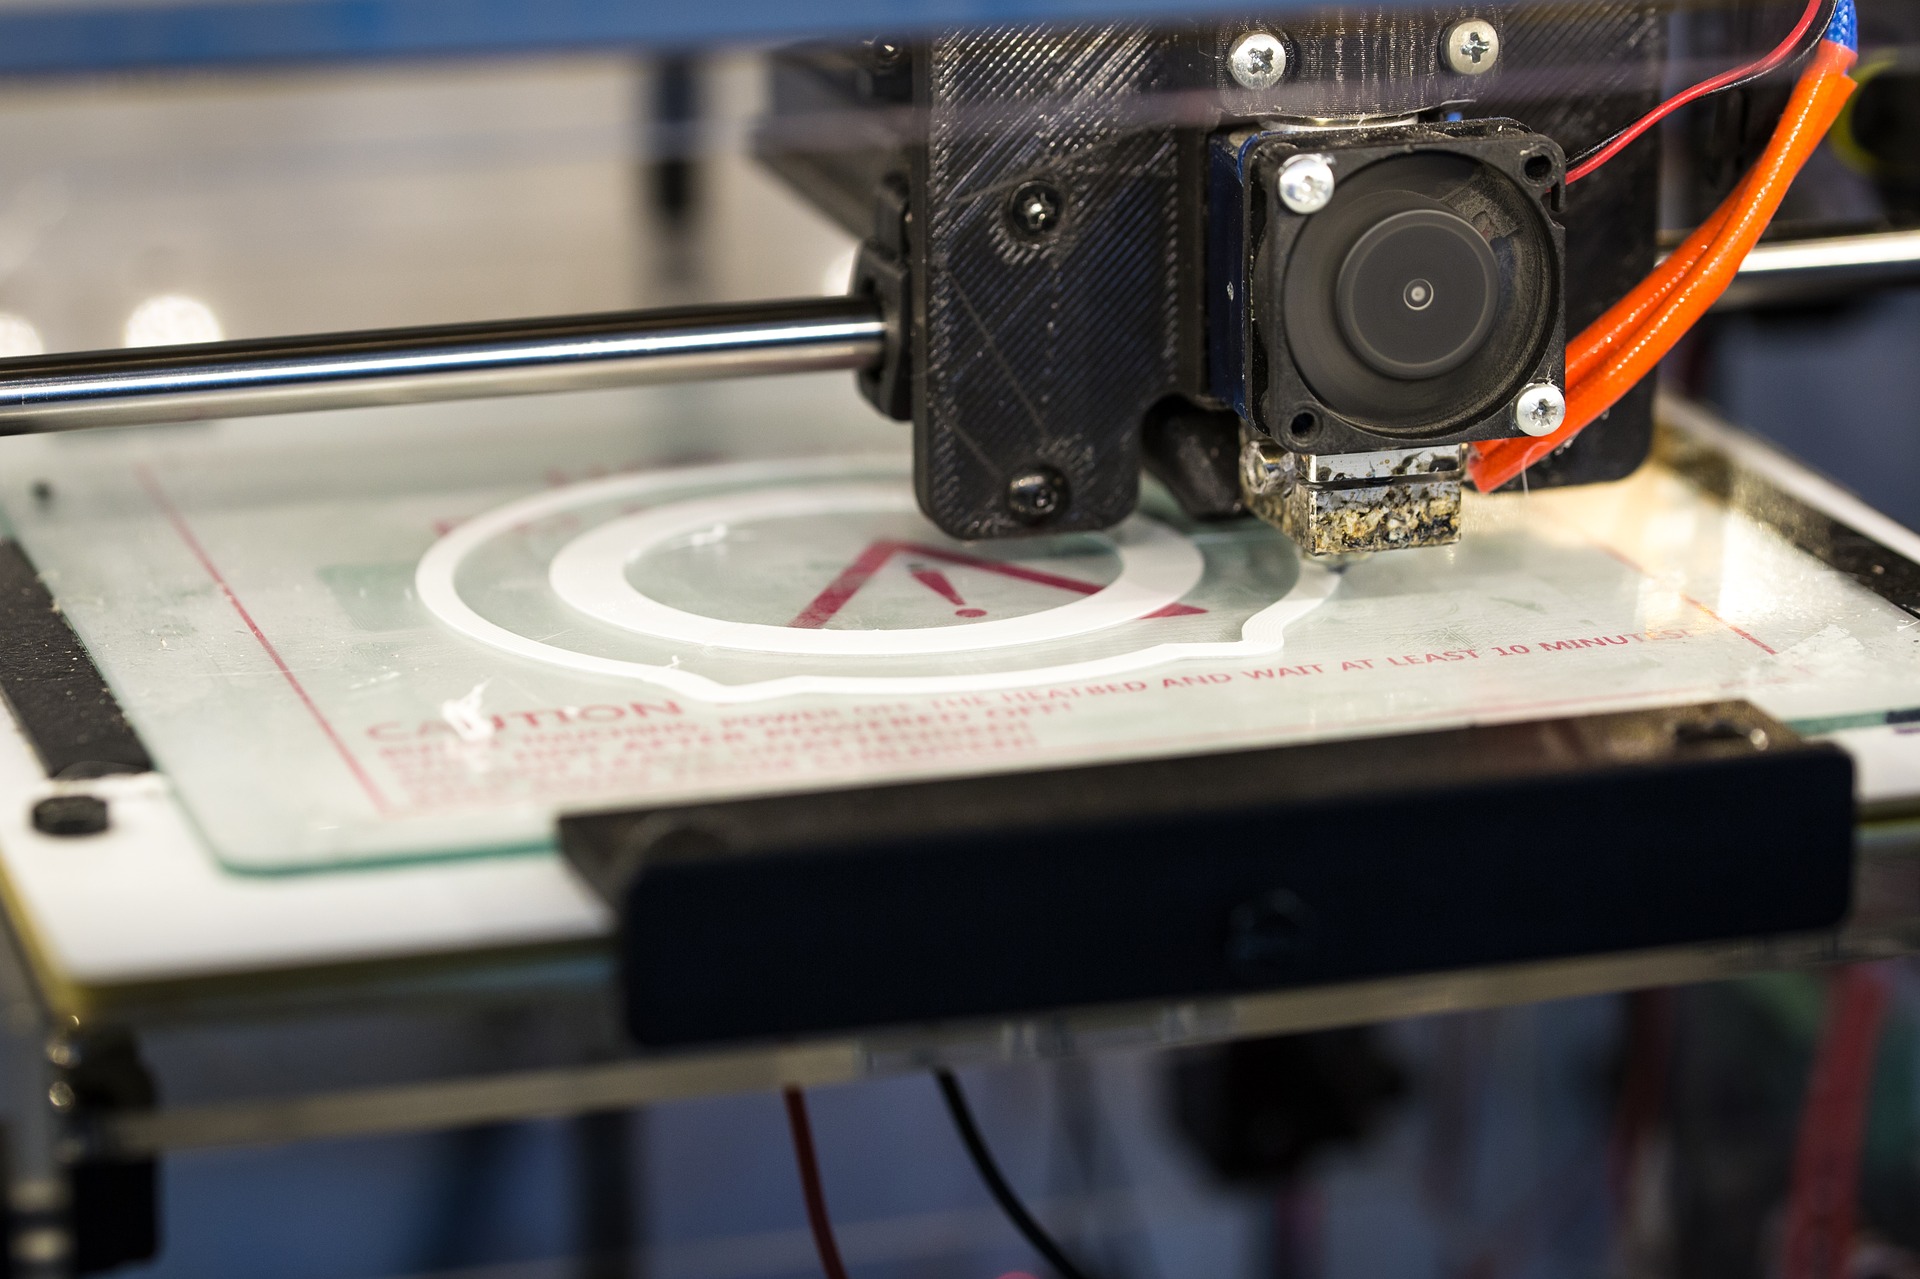 Learning by touching: 3D printing for education